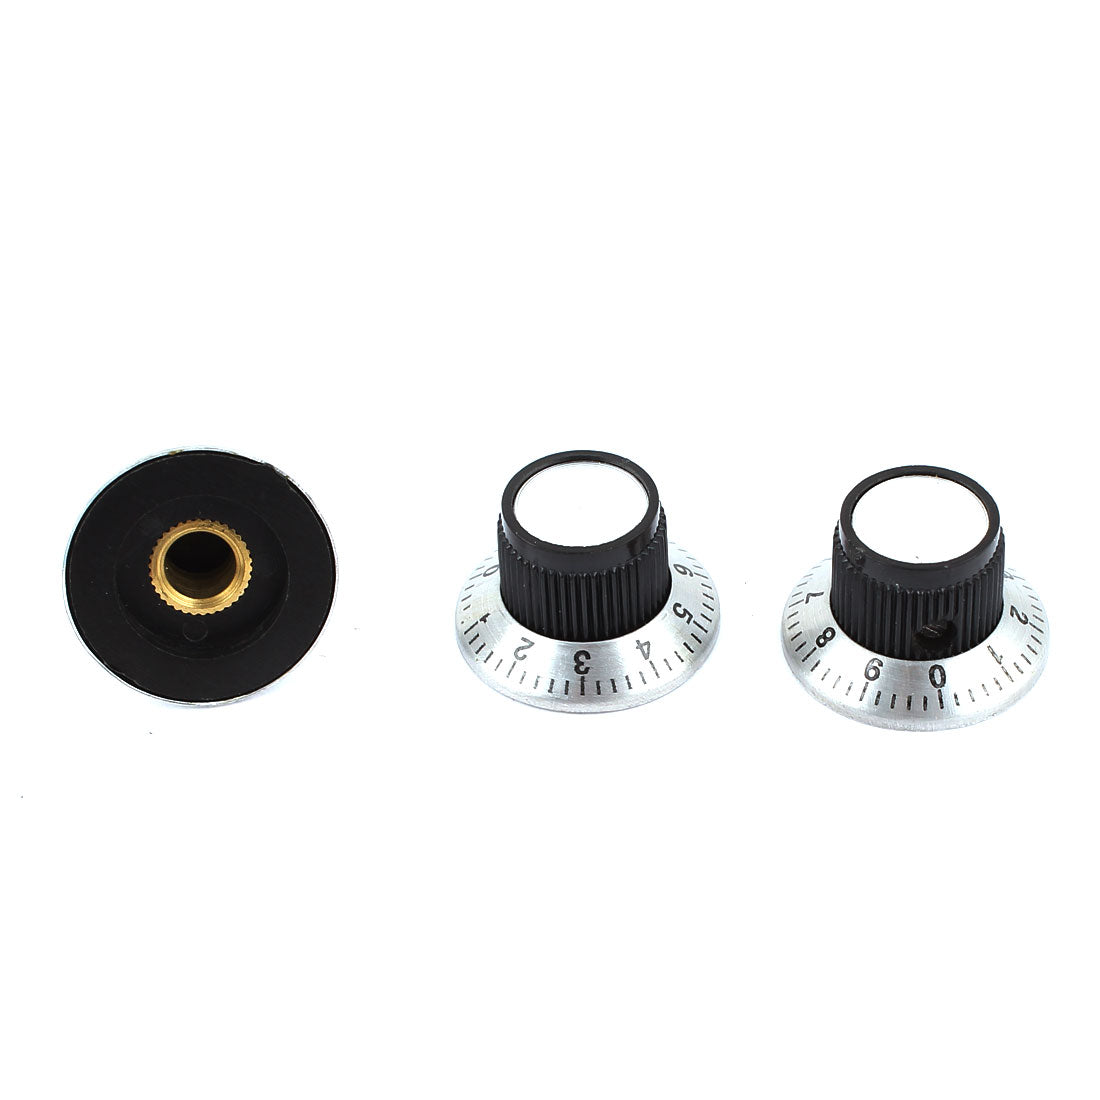 uxcell Uxcell 3pcs 15mm Dia Rotary Knob w 0-9 Dial for 6mm Dia Shaft Potentiometer